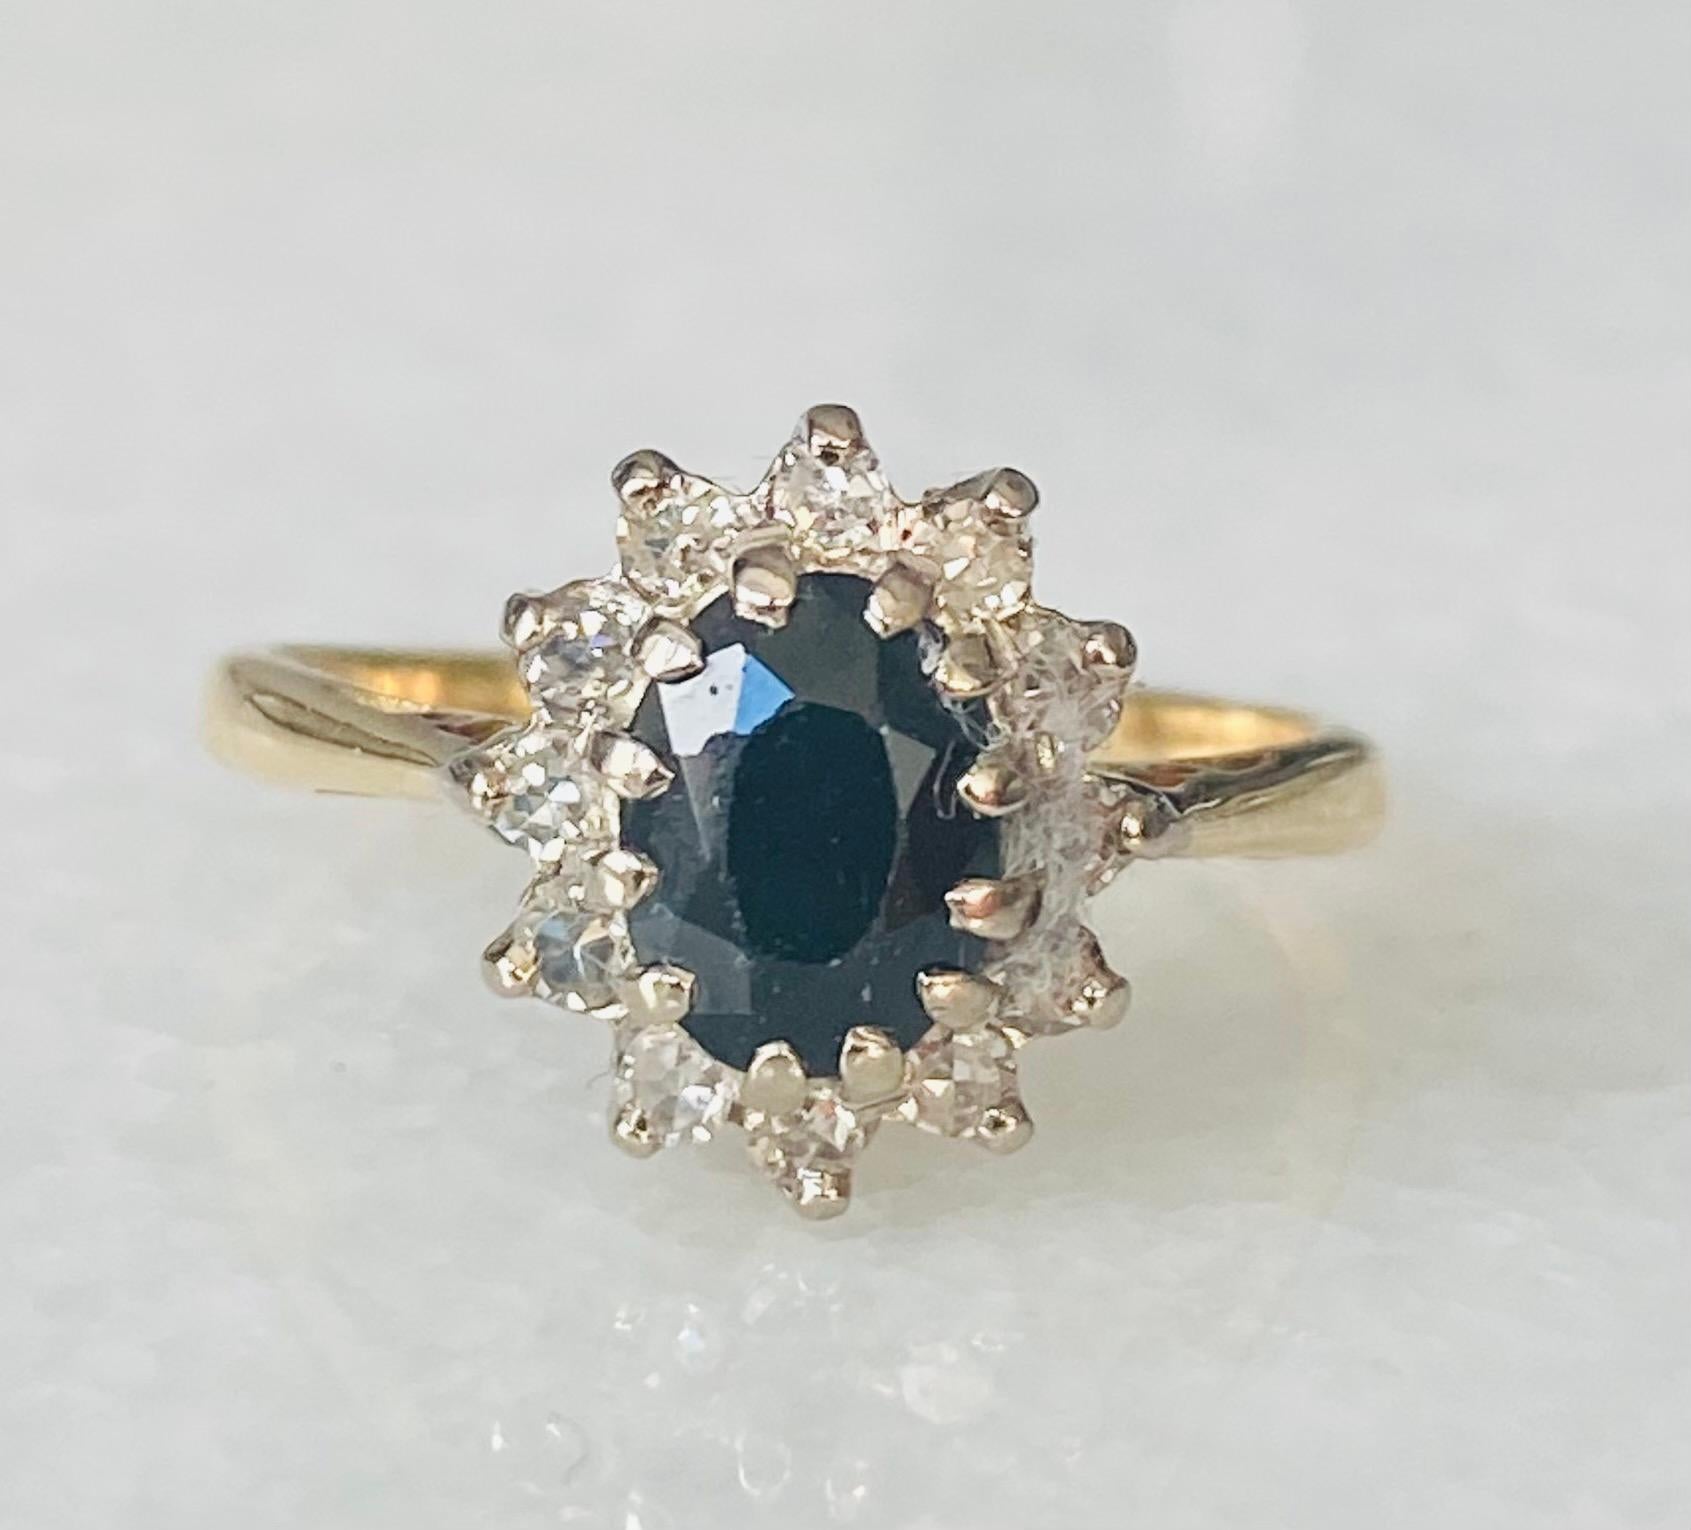 Fabulous 18 carat yellow golden vintage ring with blue sapphire surrounded with 12 brilliant cut diamonds. Each diamond is about 0.015 carat. The diamonds totally complete this ring. Ring size 6 3/4 (US) 17 1/4 (EU),  N 1/2 (UK) The sapphire of